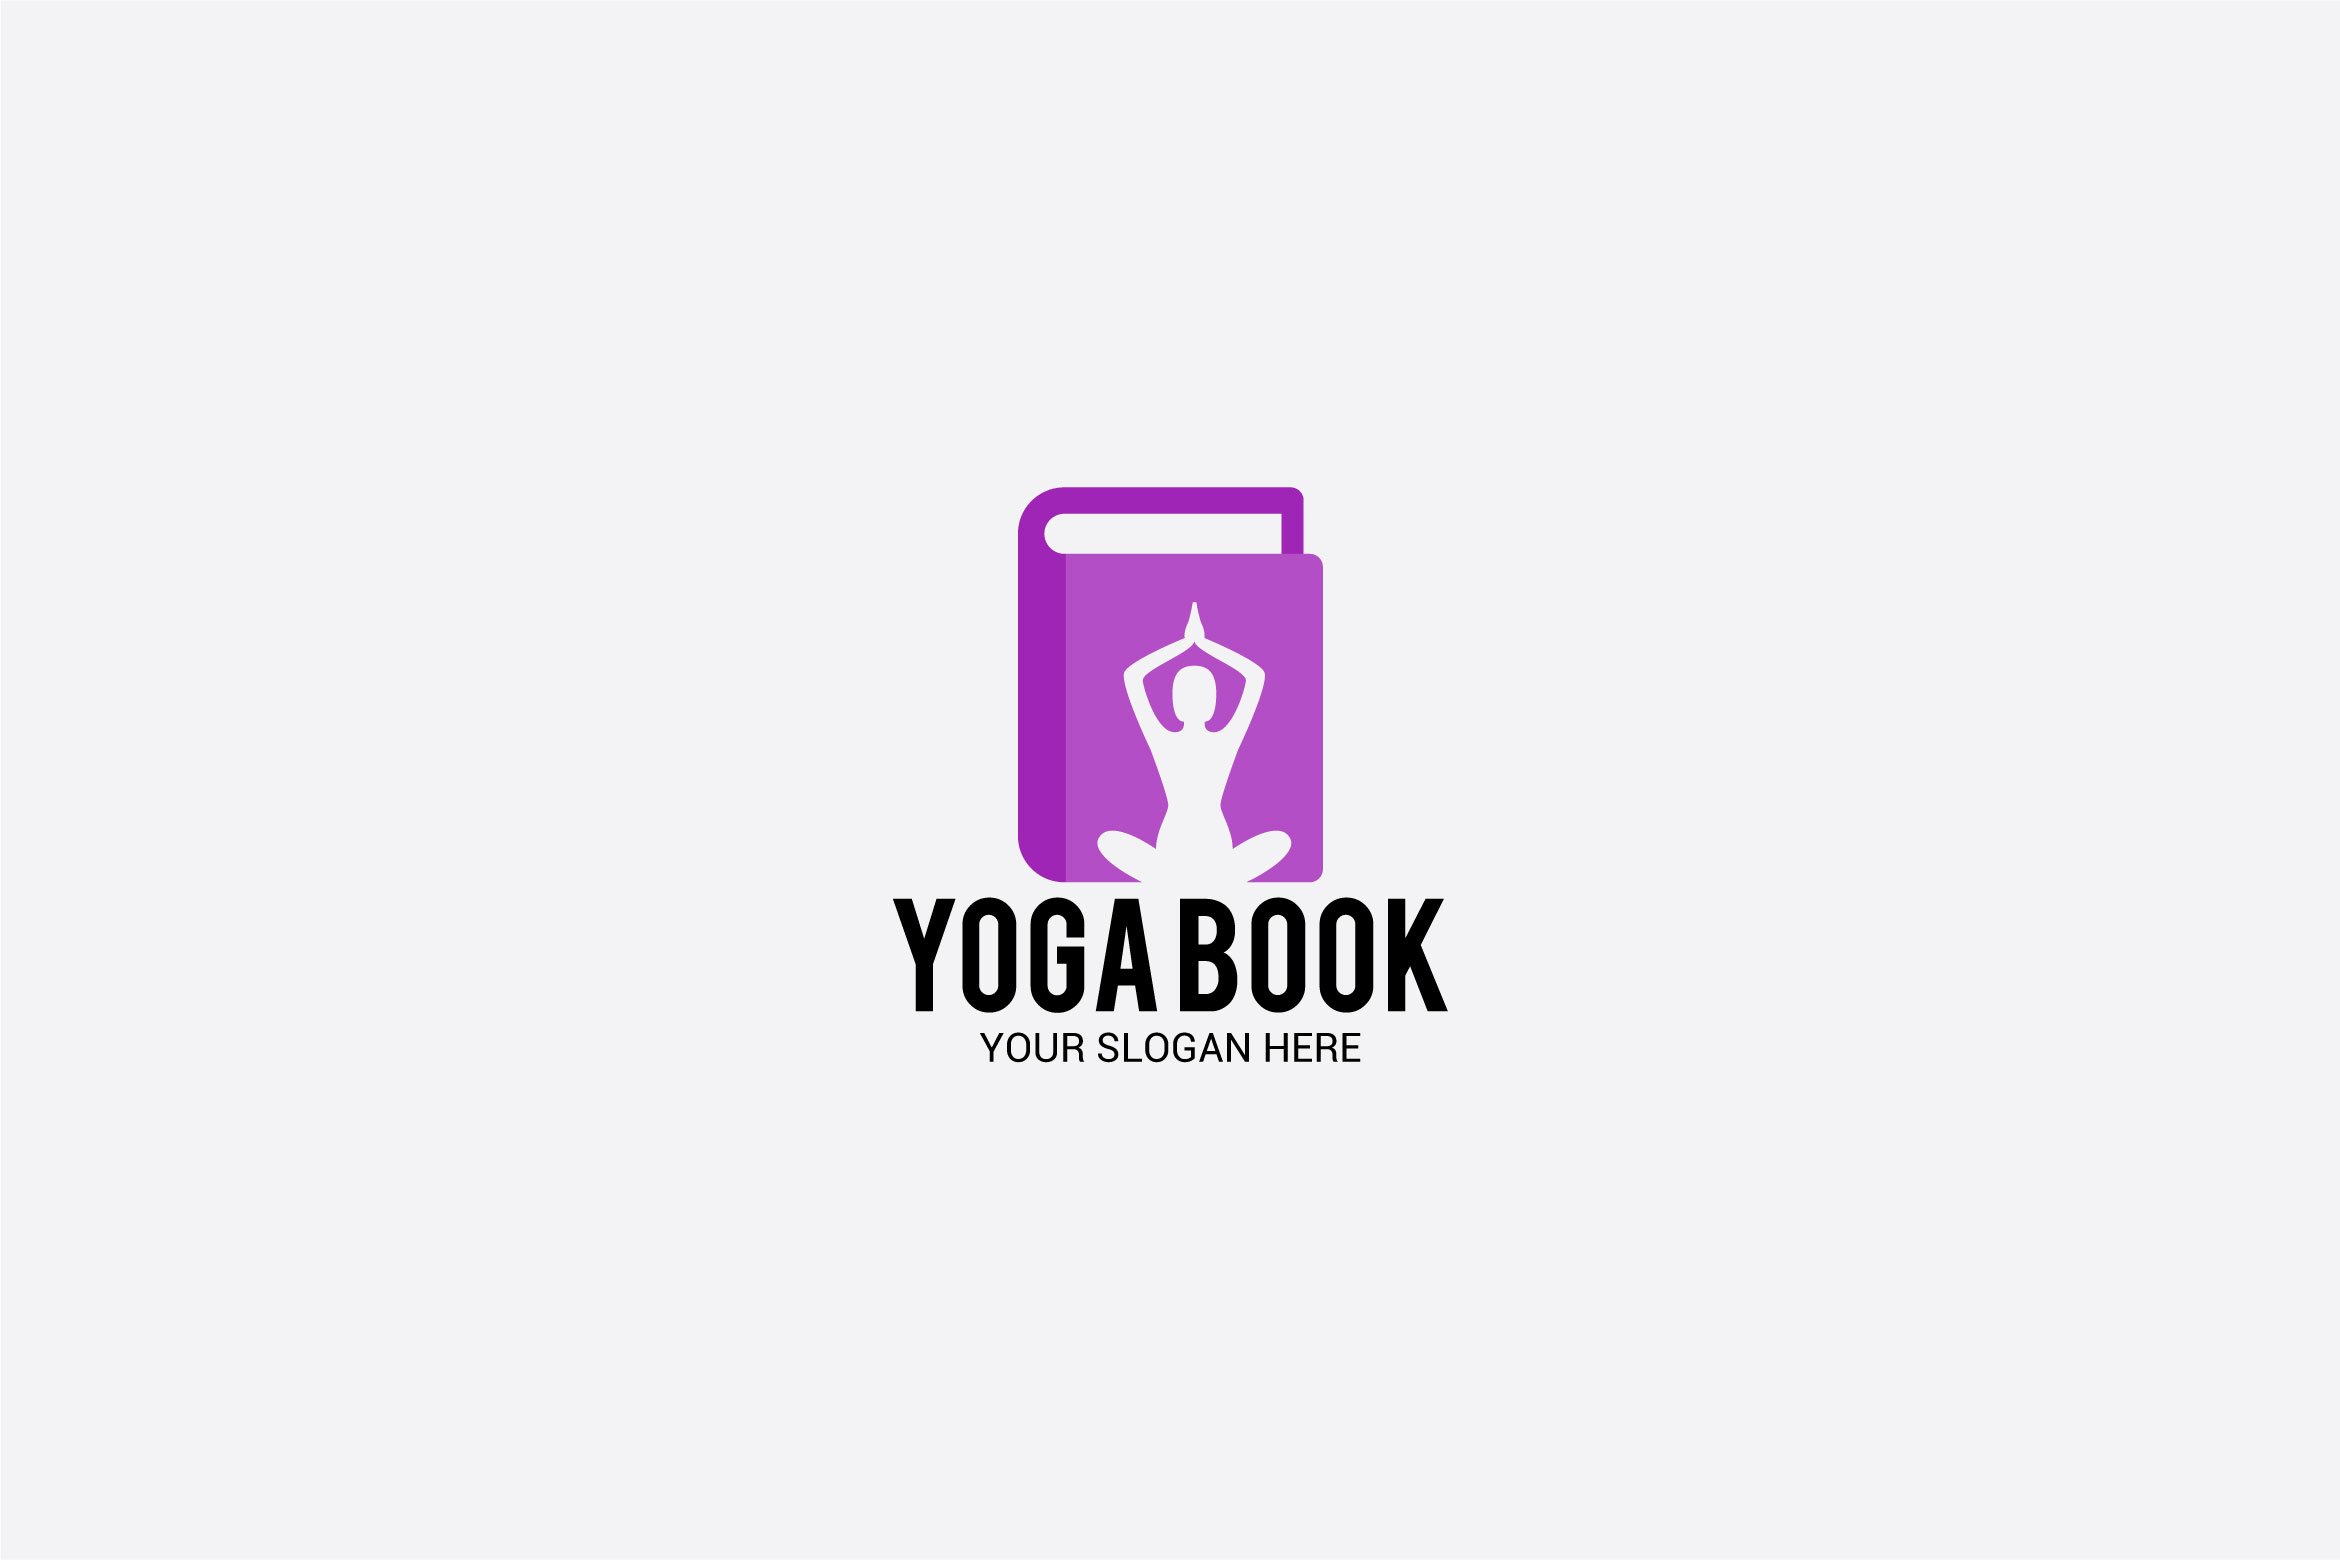 Purple book logo for yoga industry.